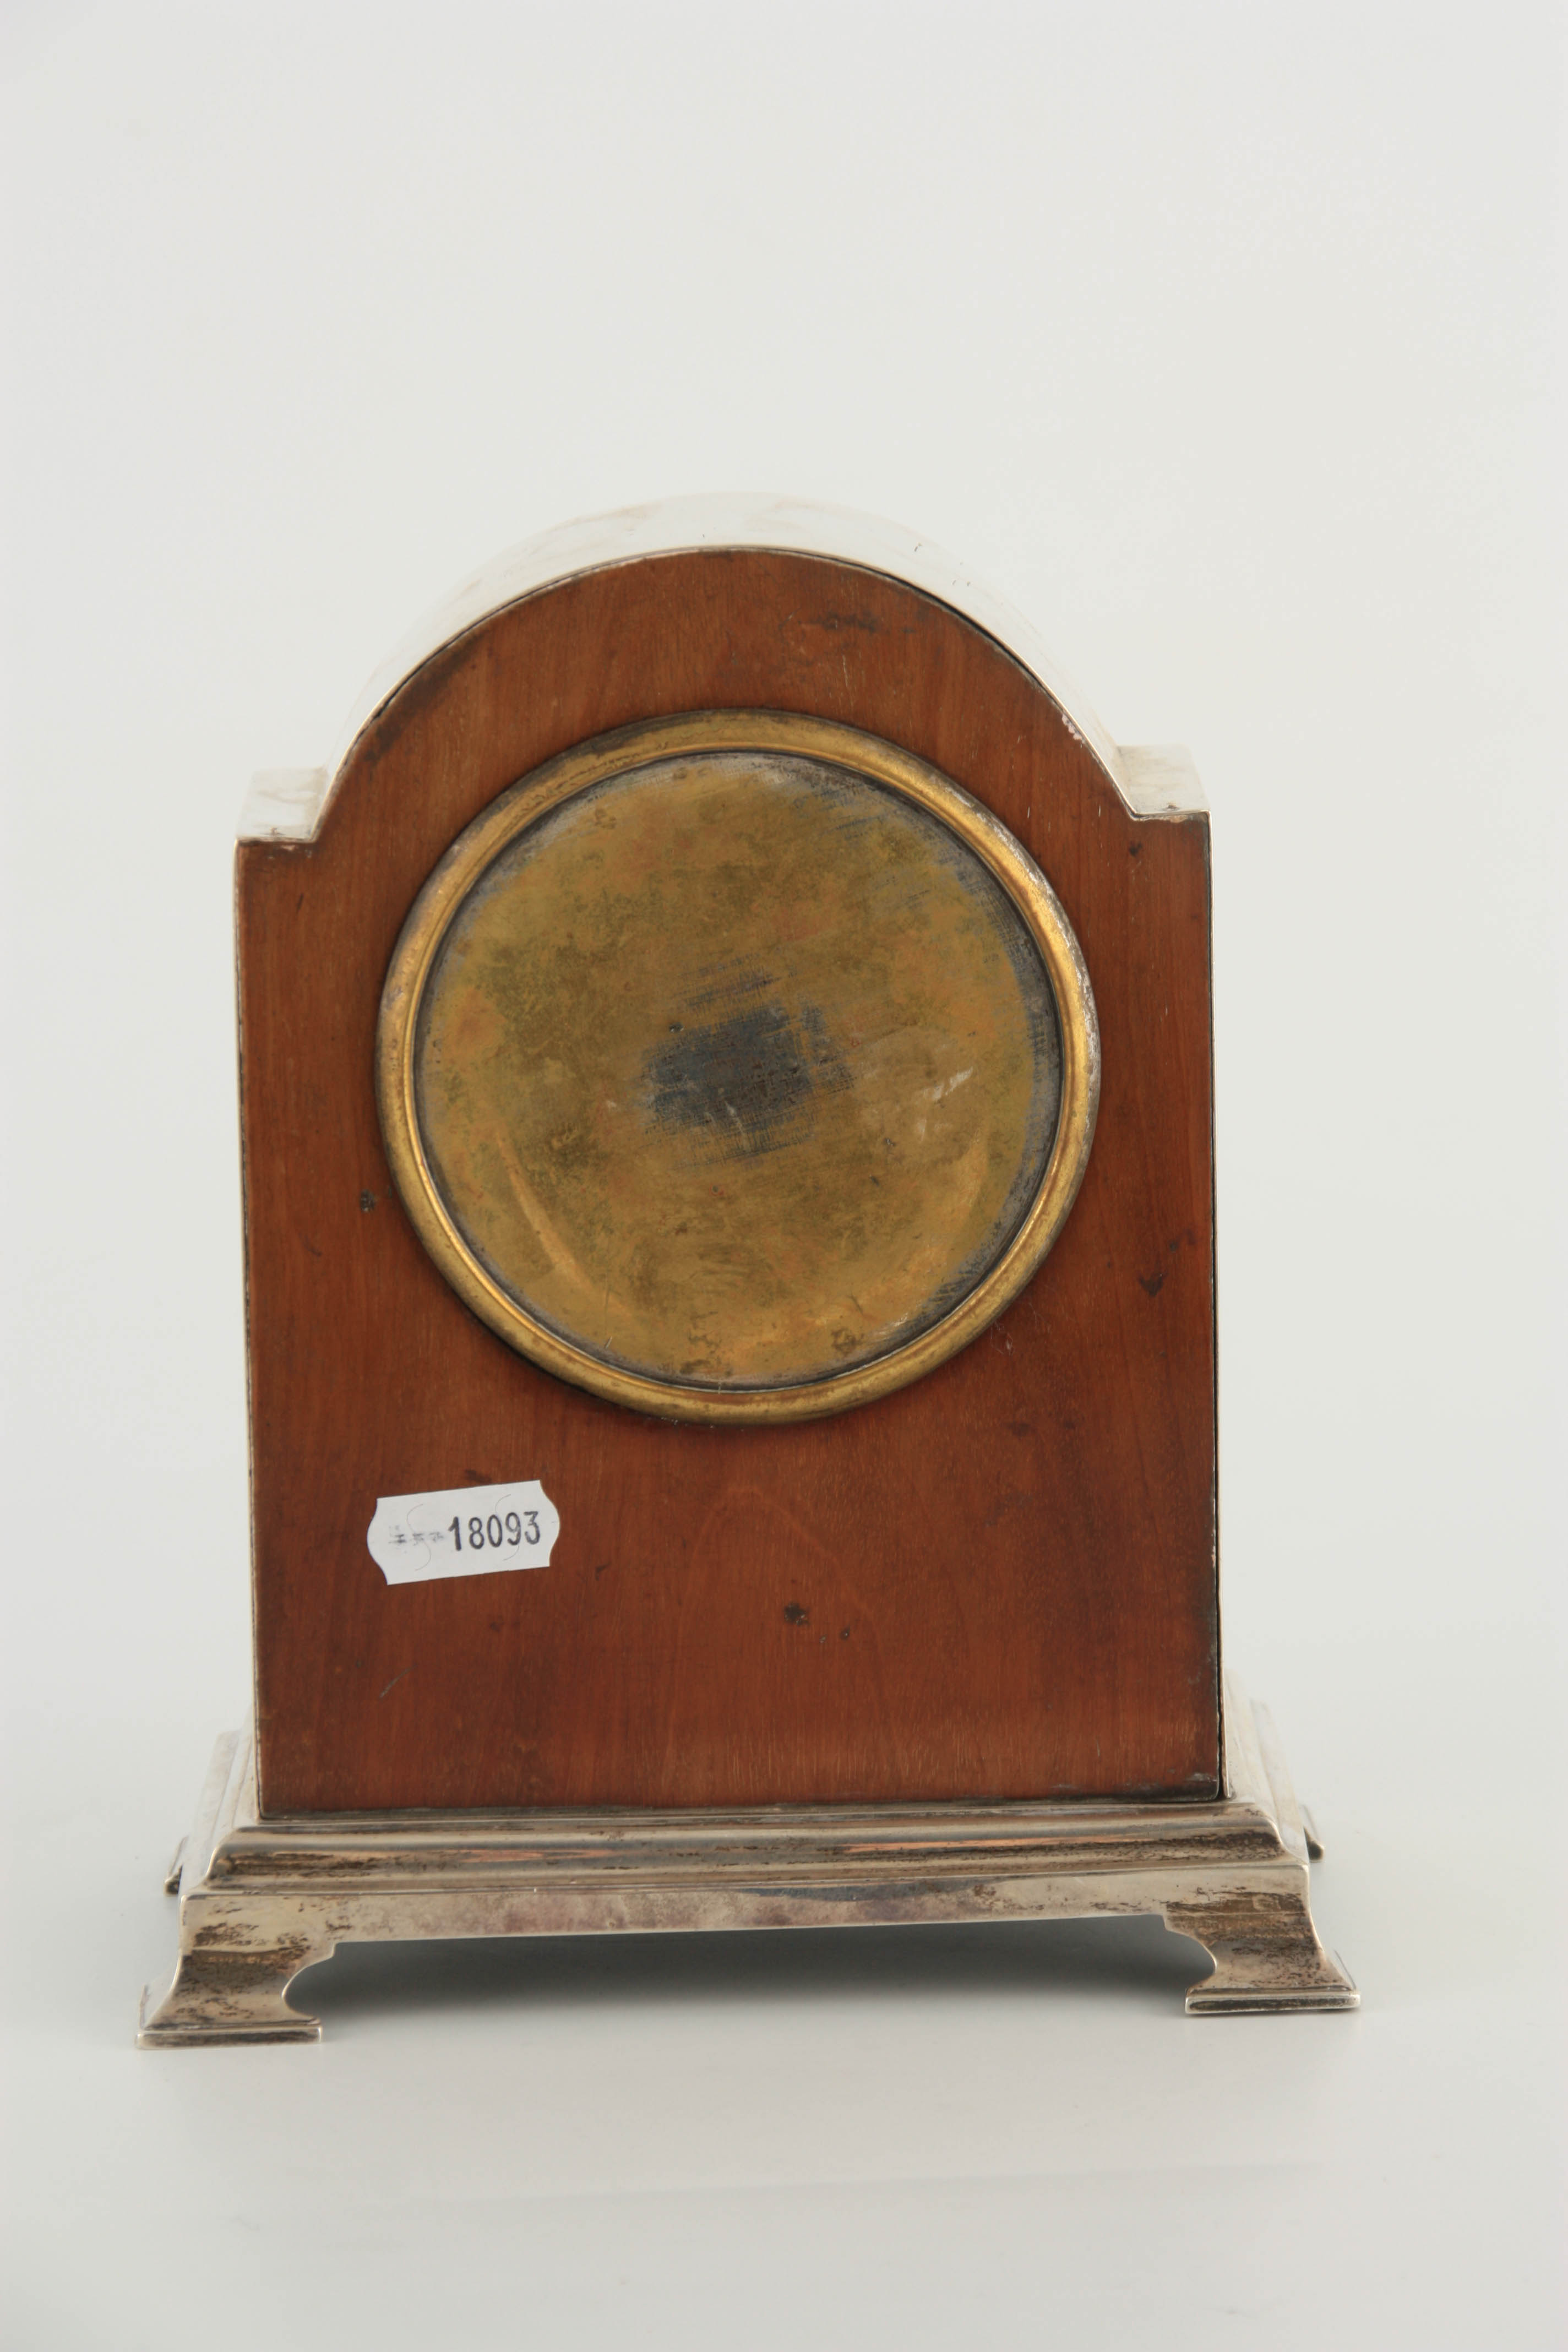 A GOOD EDWARDIAN SILVER AND TORTOISESHELL MANTEL CLOCK the arch-shaped case with Adam-style inlaid - Image 4 of 7